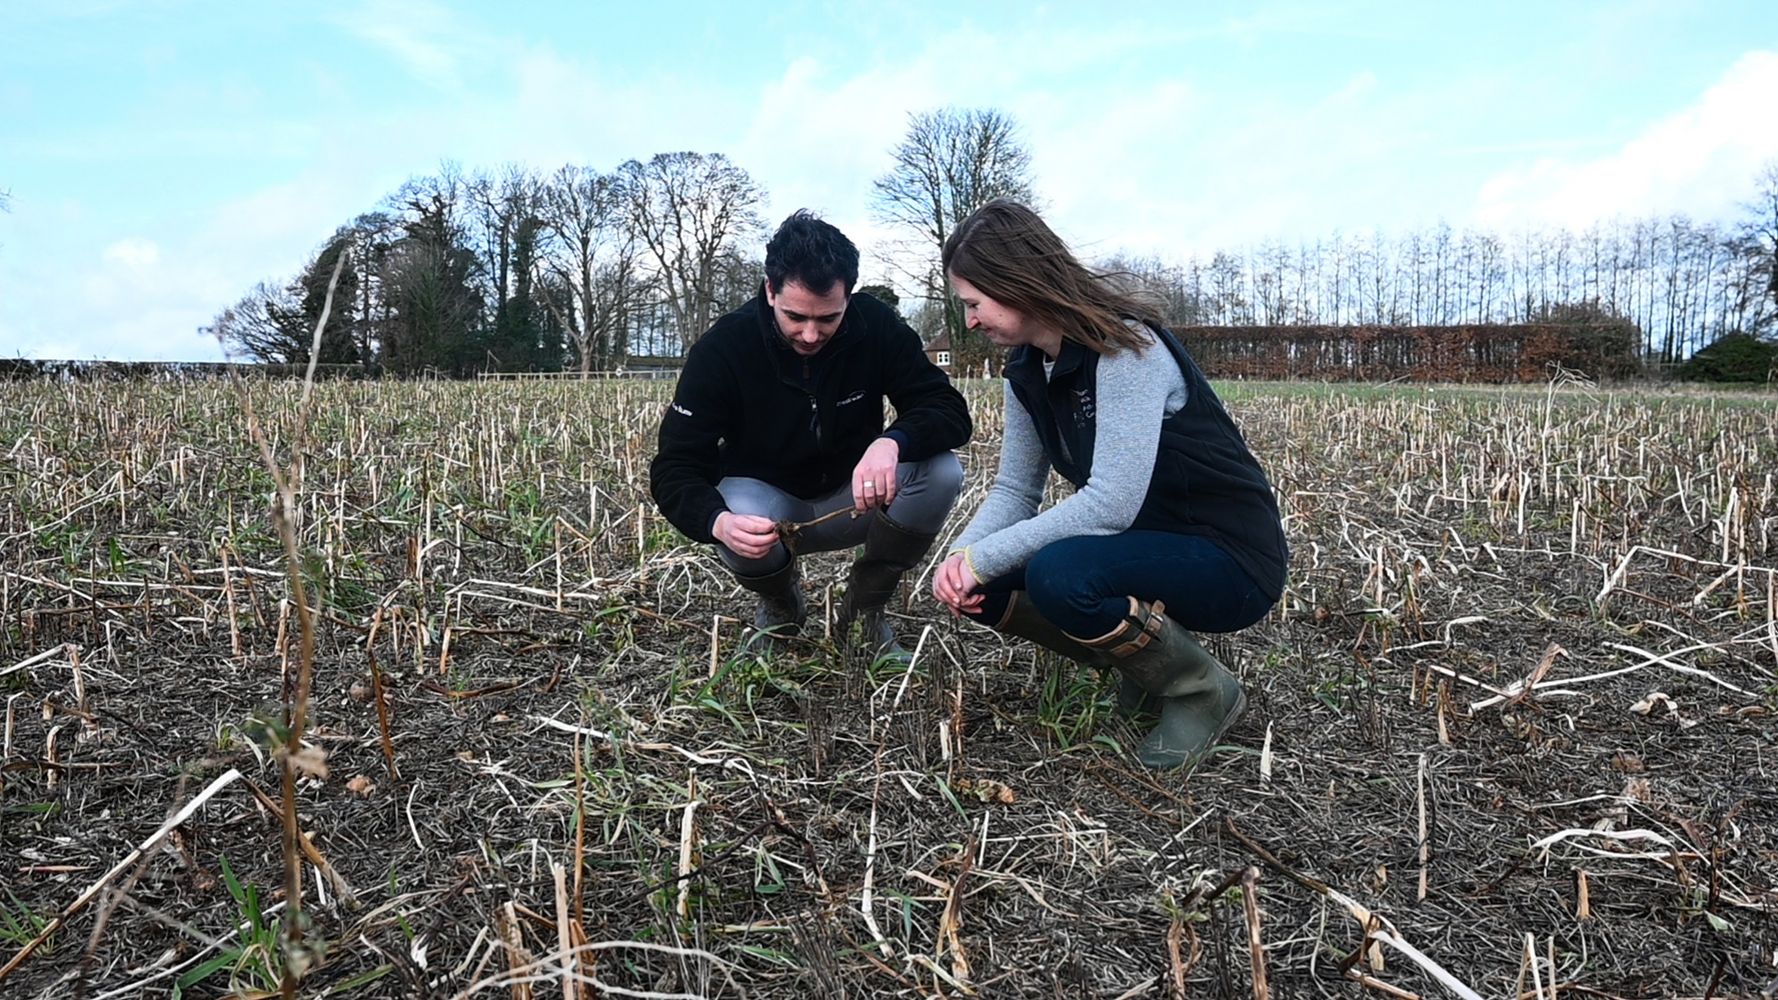 Two agricultural advisors inspecting crops in an arable field